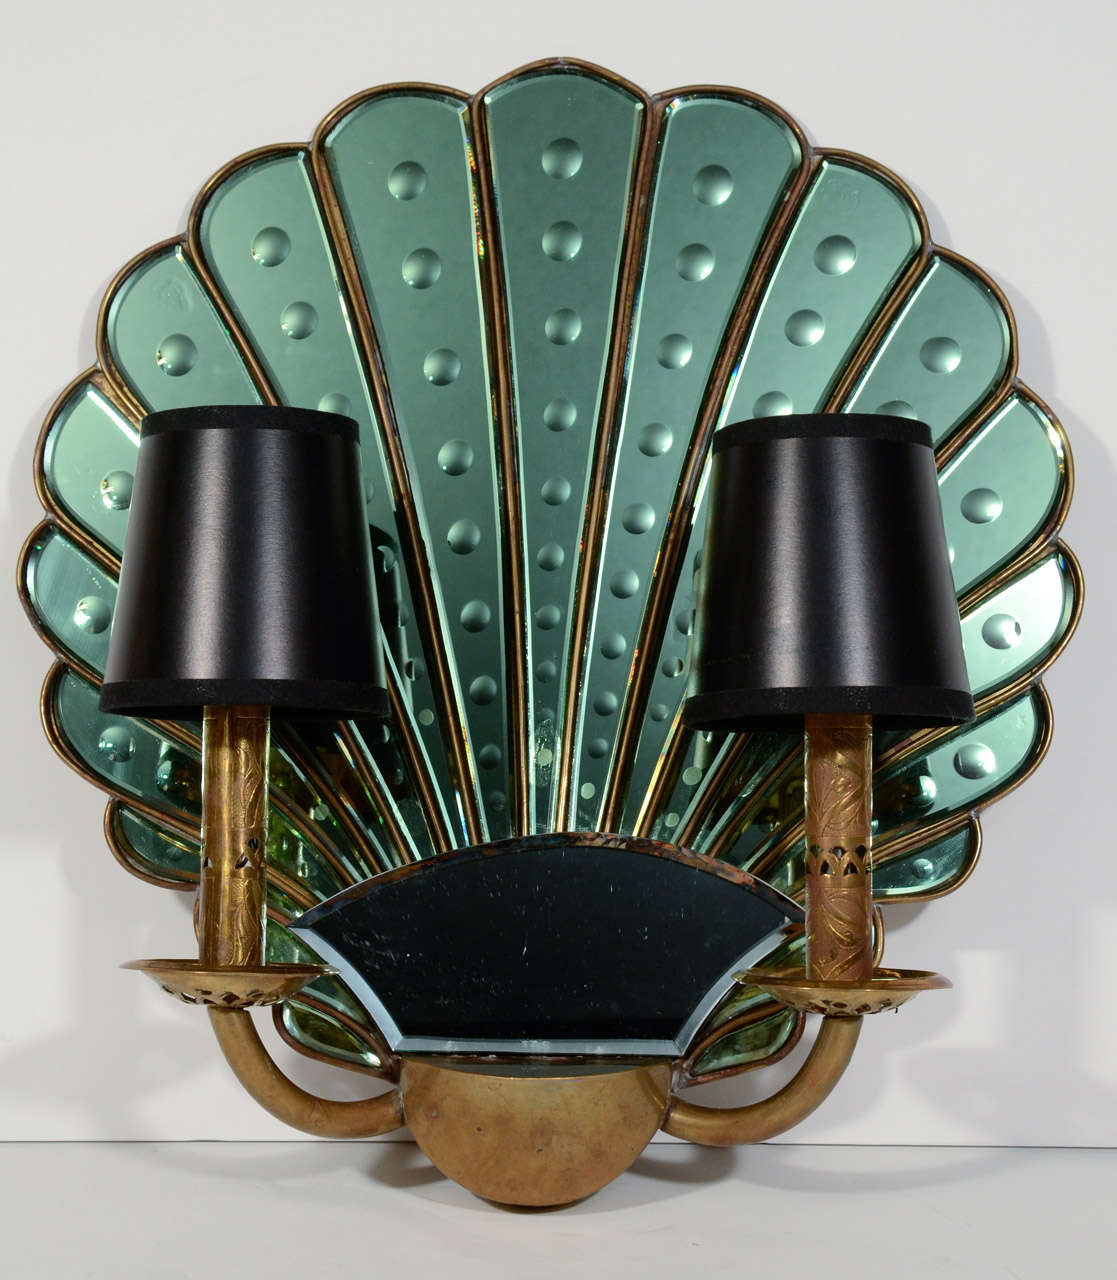 Pair of highly stylized Art Deco sconces.  The sconces are comprised of large scalloped backplates with shell or fan design in emerald green tinted mirror. The mirrored insets have reverse etched convex circle designs. The sconces have a darkened